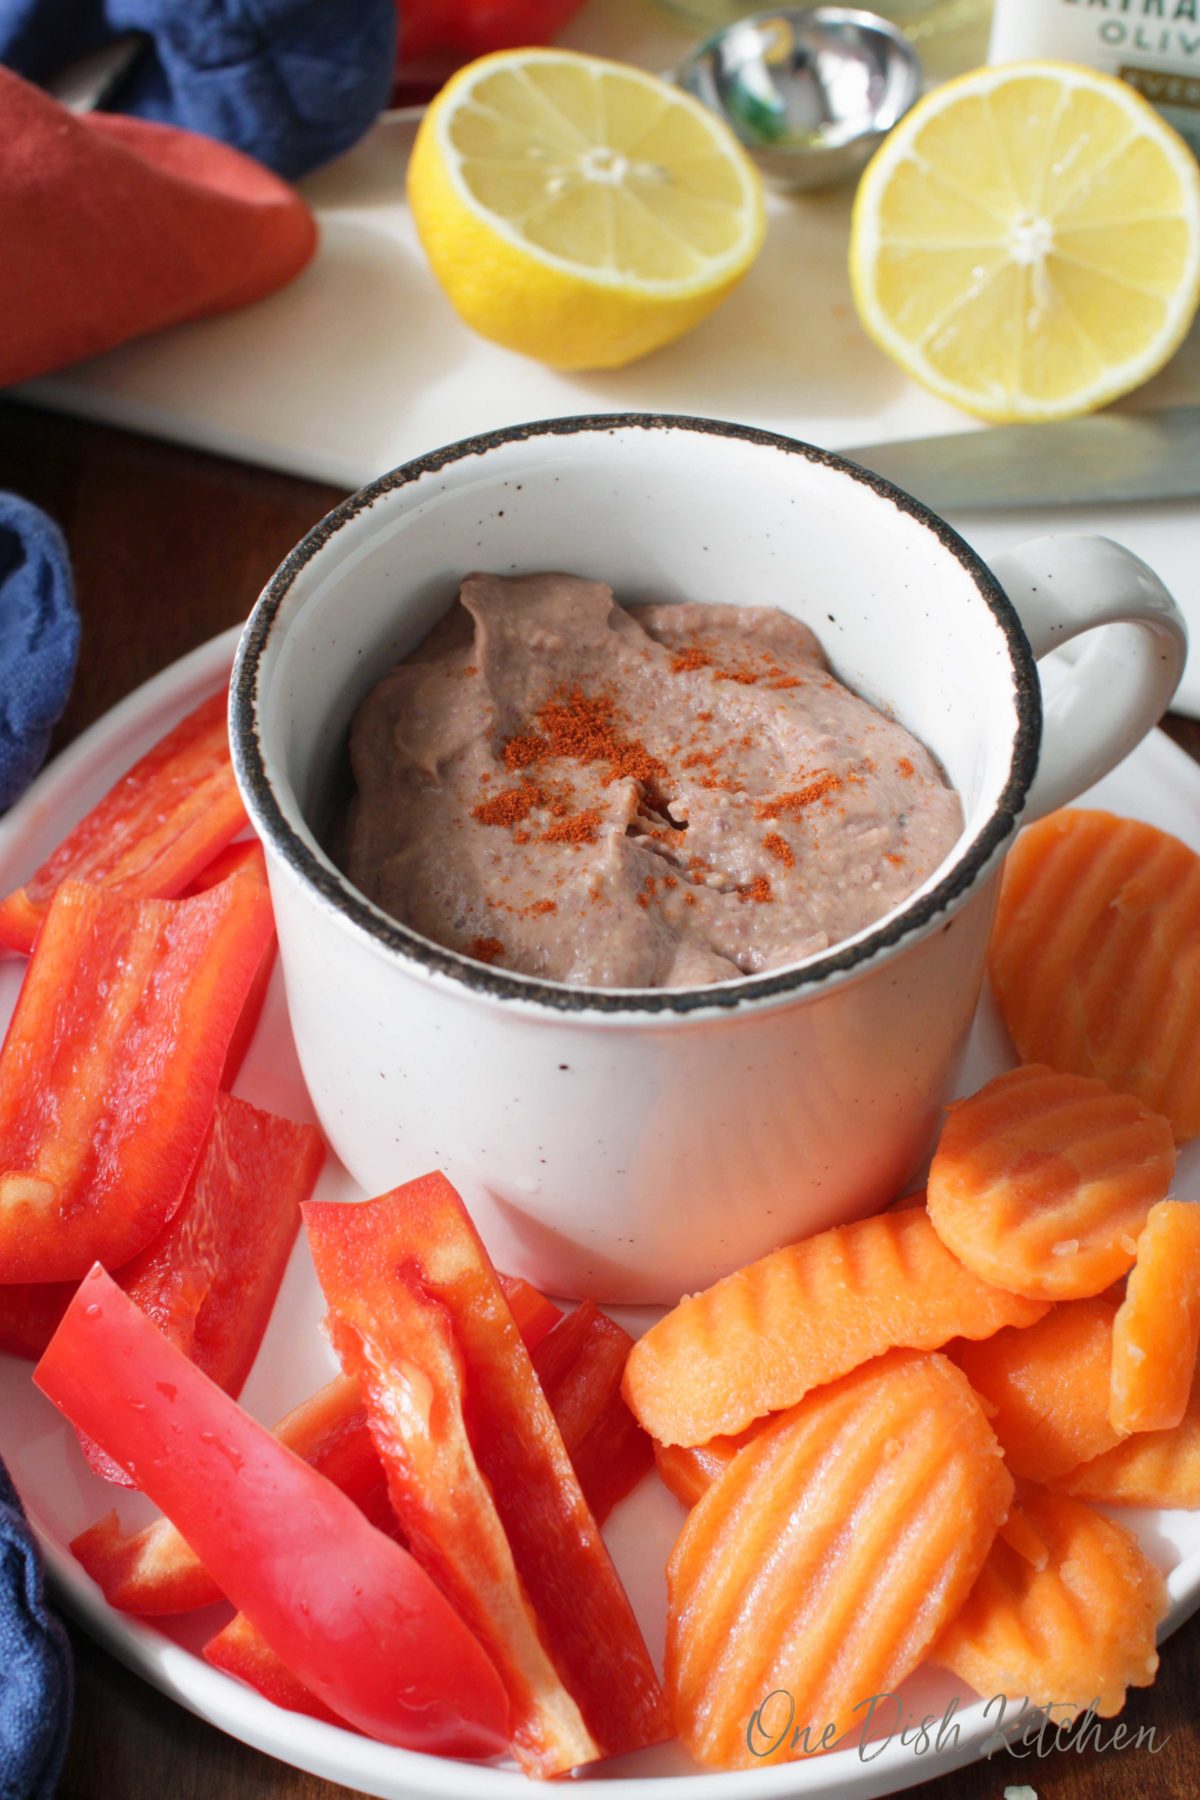 A bowl of black bean hummus plated with sliced carrots and red peppers with lemon halves in the background